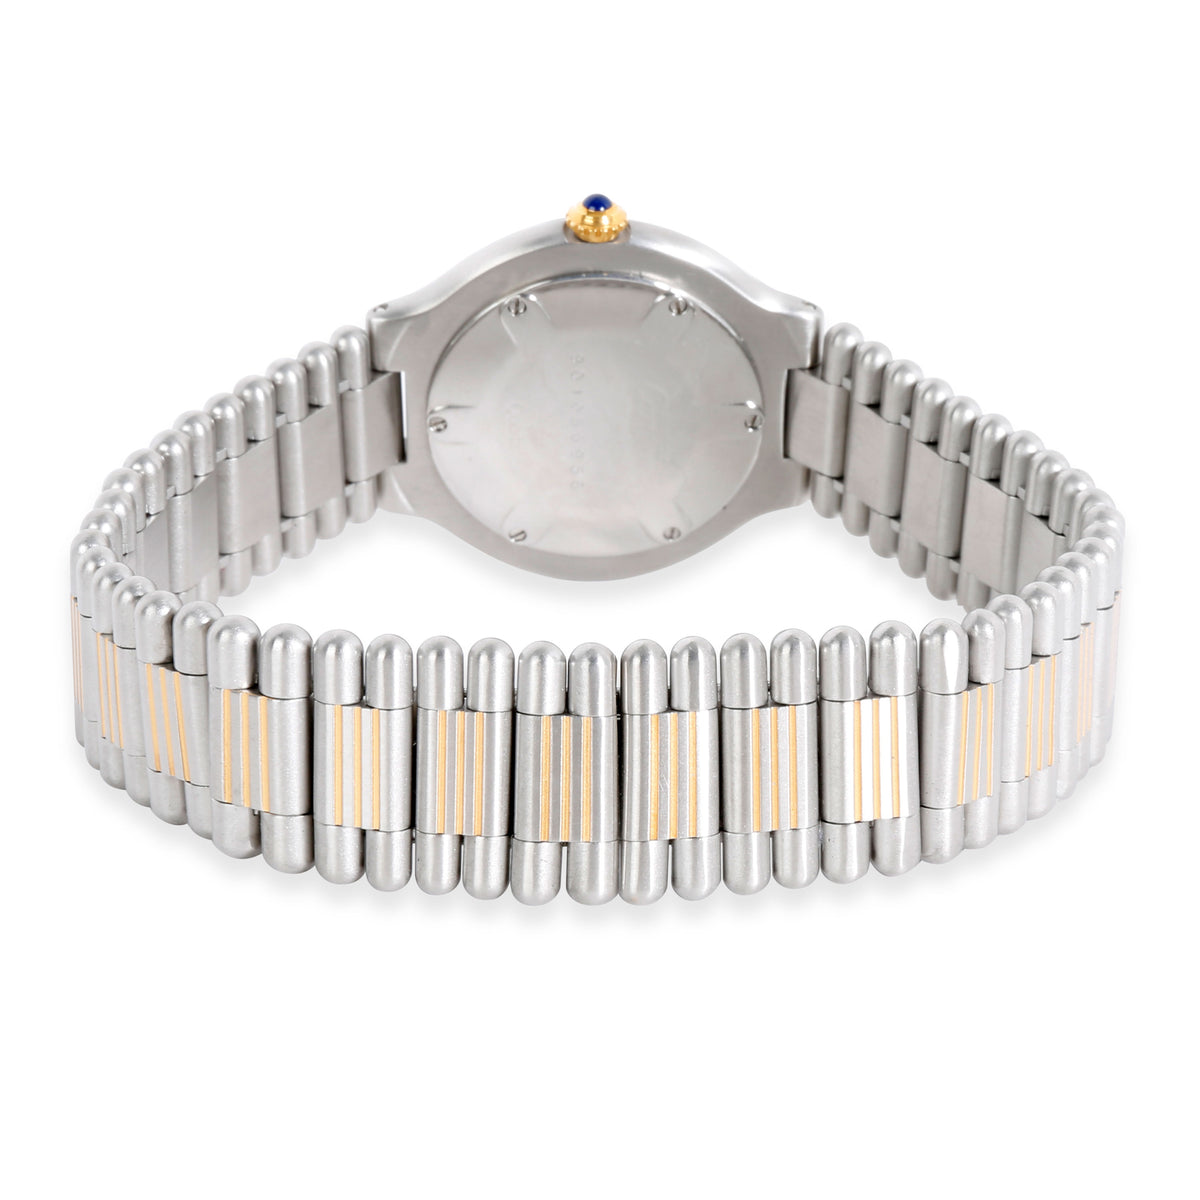 Cartier 21 21 Unisex Watch in  Stainless Steel/Gold Plate